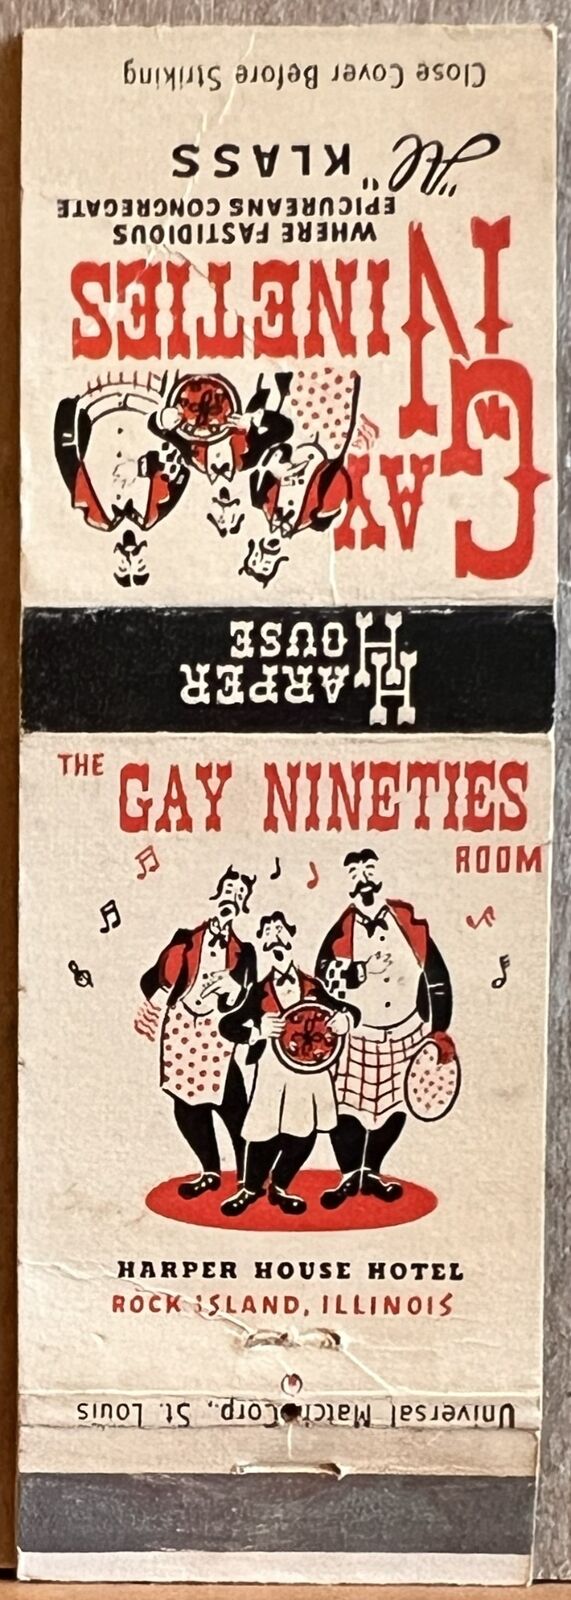 The Gay Nineties Rockford IL Illinois Harper House Hotel Vintage Matchbook Cover